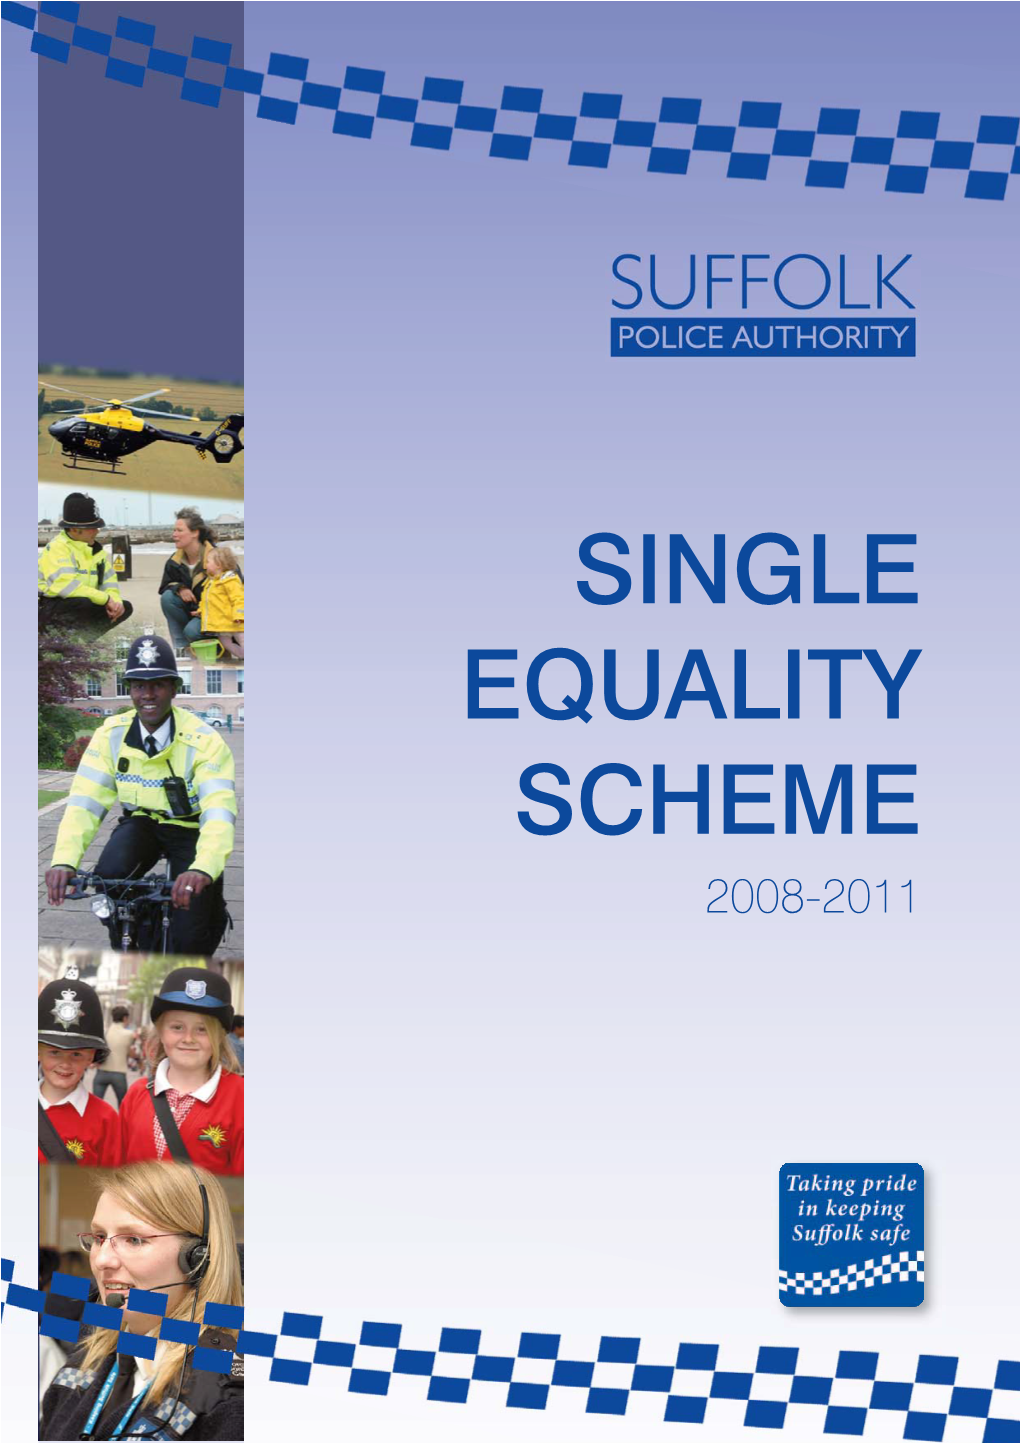 SINGLE EQUALITY SCHEME 2008-2011 Contacting Suffolk Police Authority